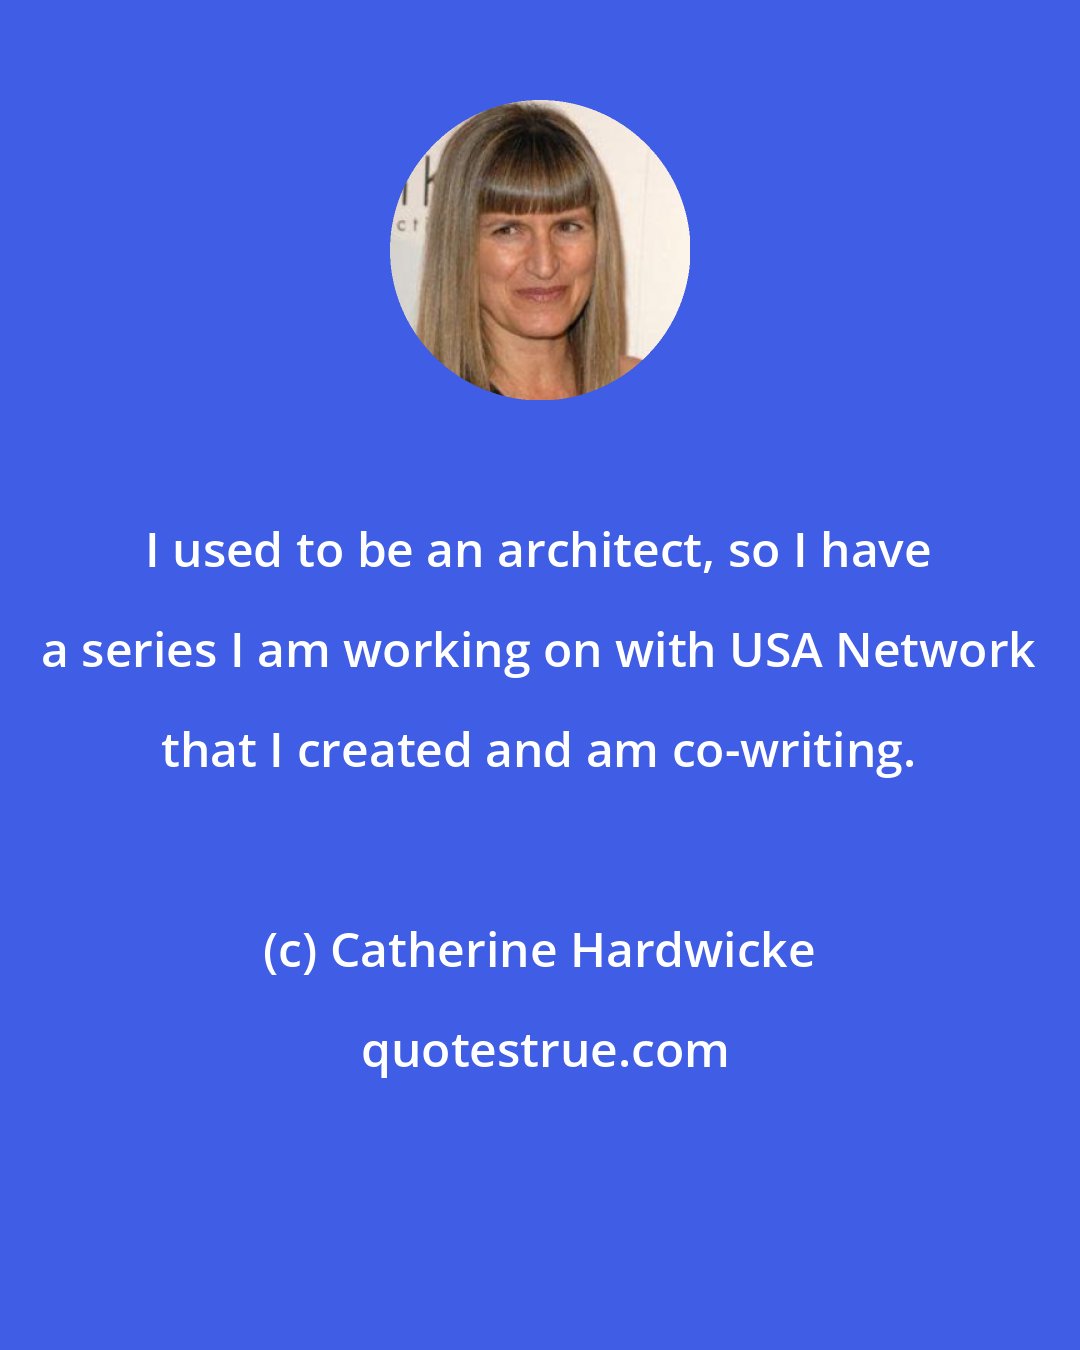 Catherine Hardwicke: I used to be an architect, so I have a series I am working on with USA Network that I created and am co-writing.